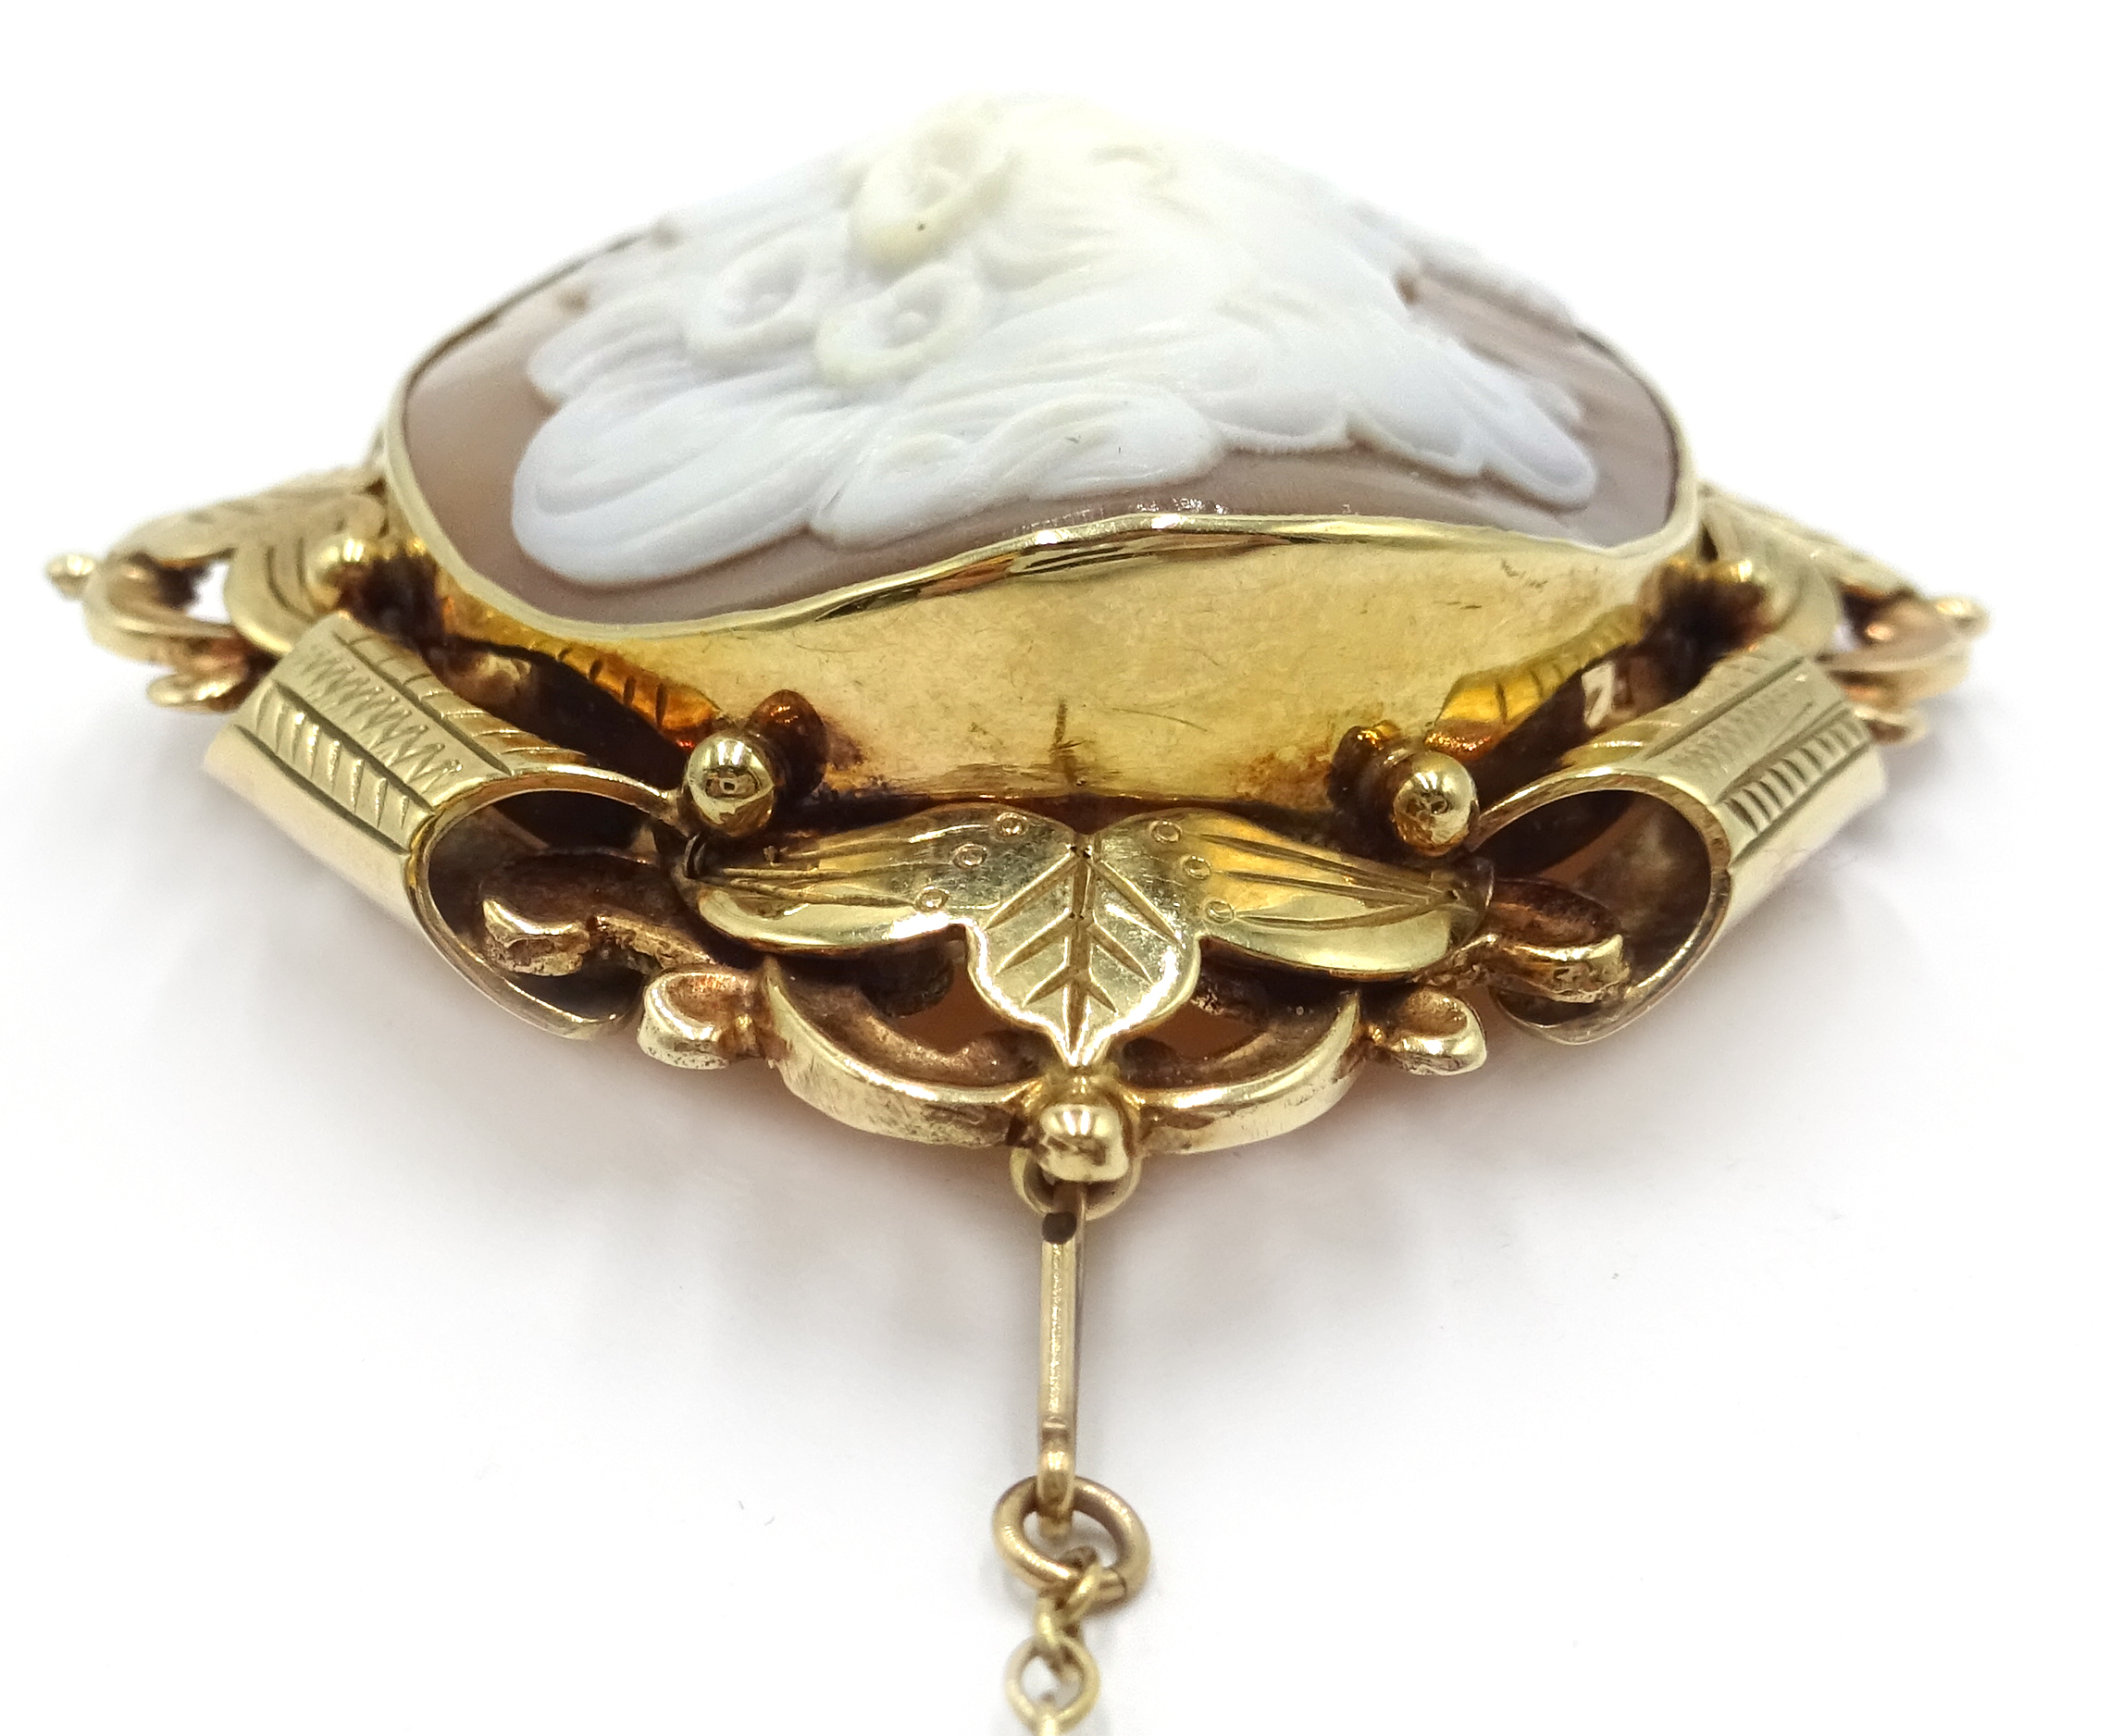 9ct gold cameo brooch with scroll and leaf design, - Image 3 of 3